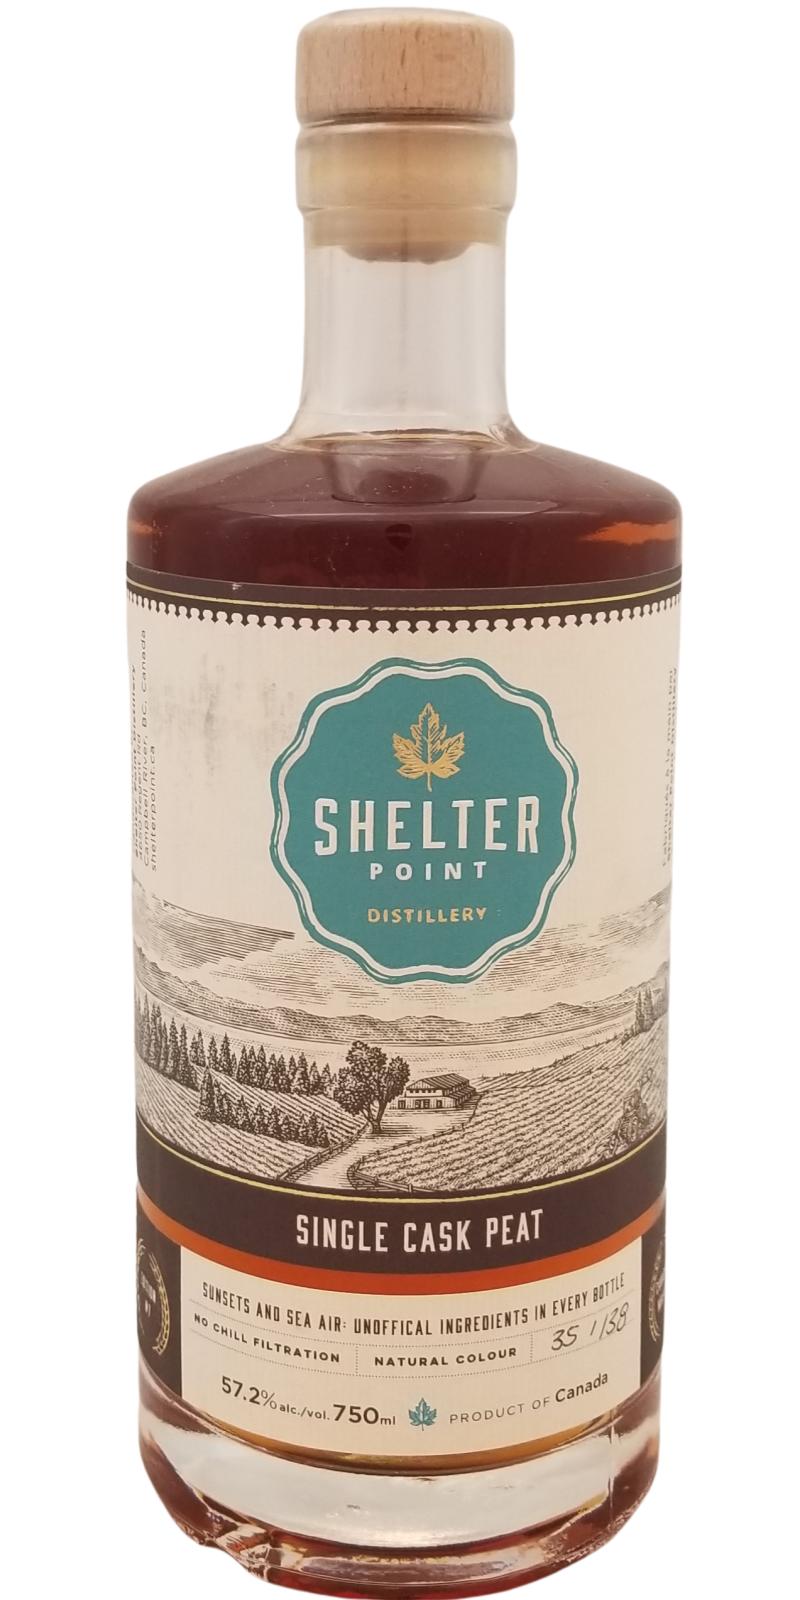 Shelter Point Single Cask Peat Finish Edition 57.2% 750ml